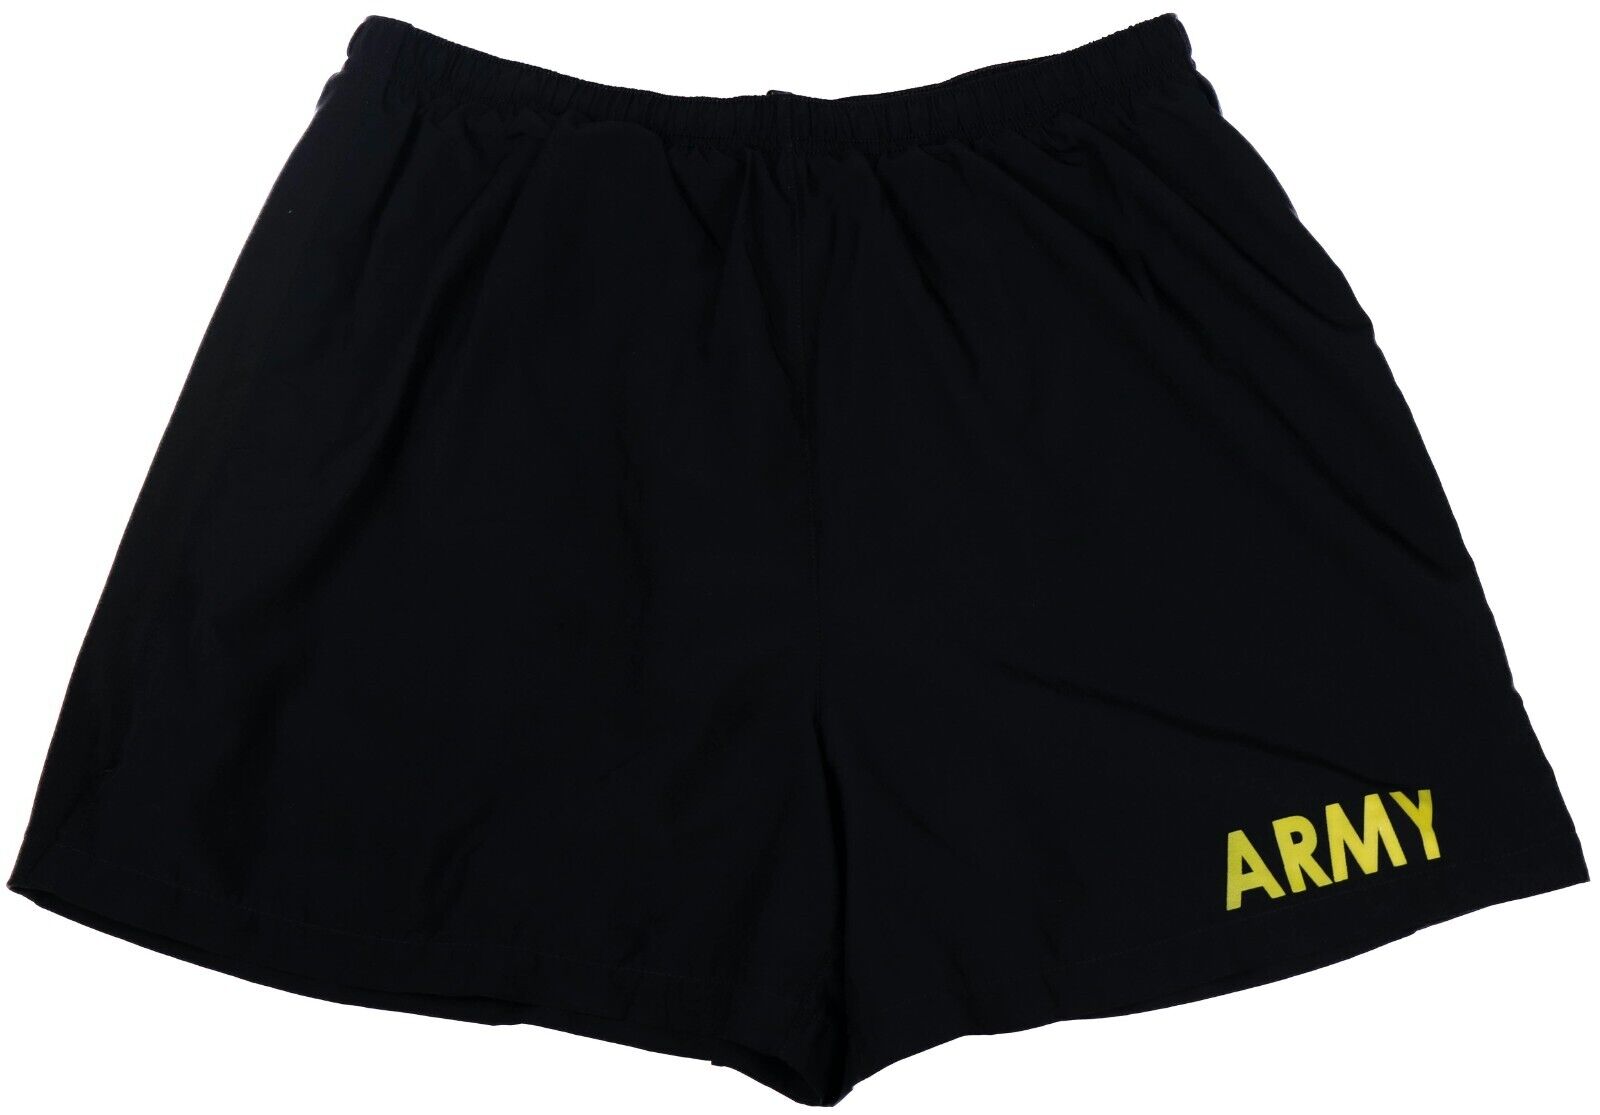 NEW SMALL - Men's APFU Shorts Army Black Gold PT Physical Fitness Shorts Trunks